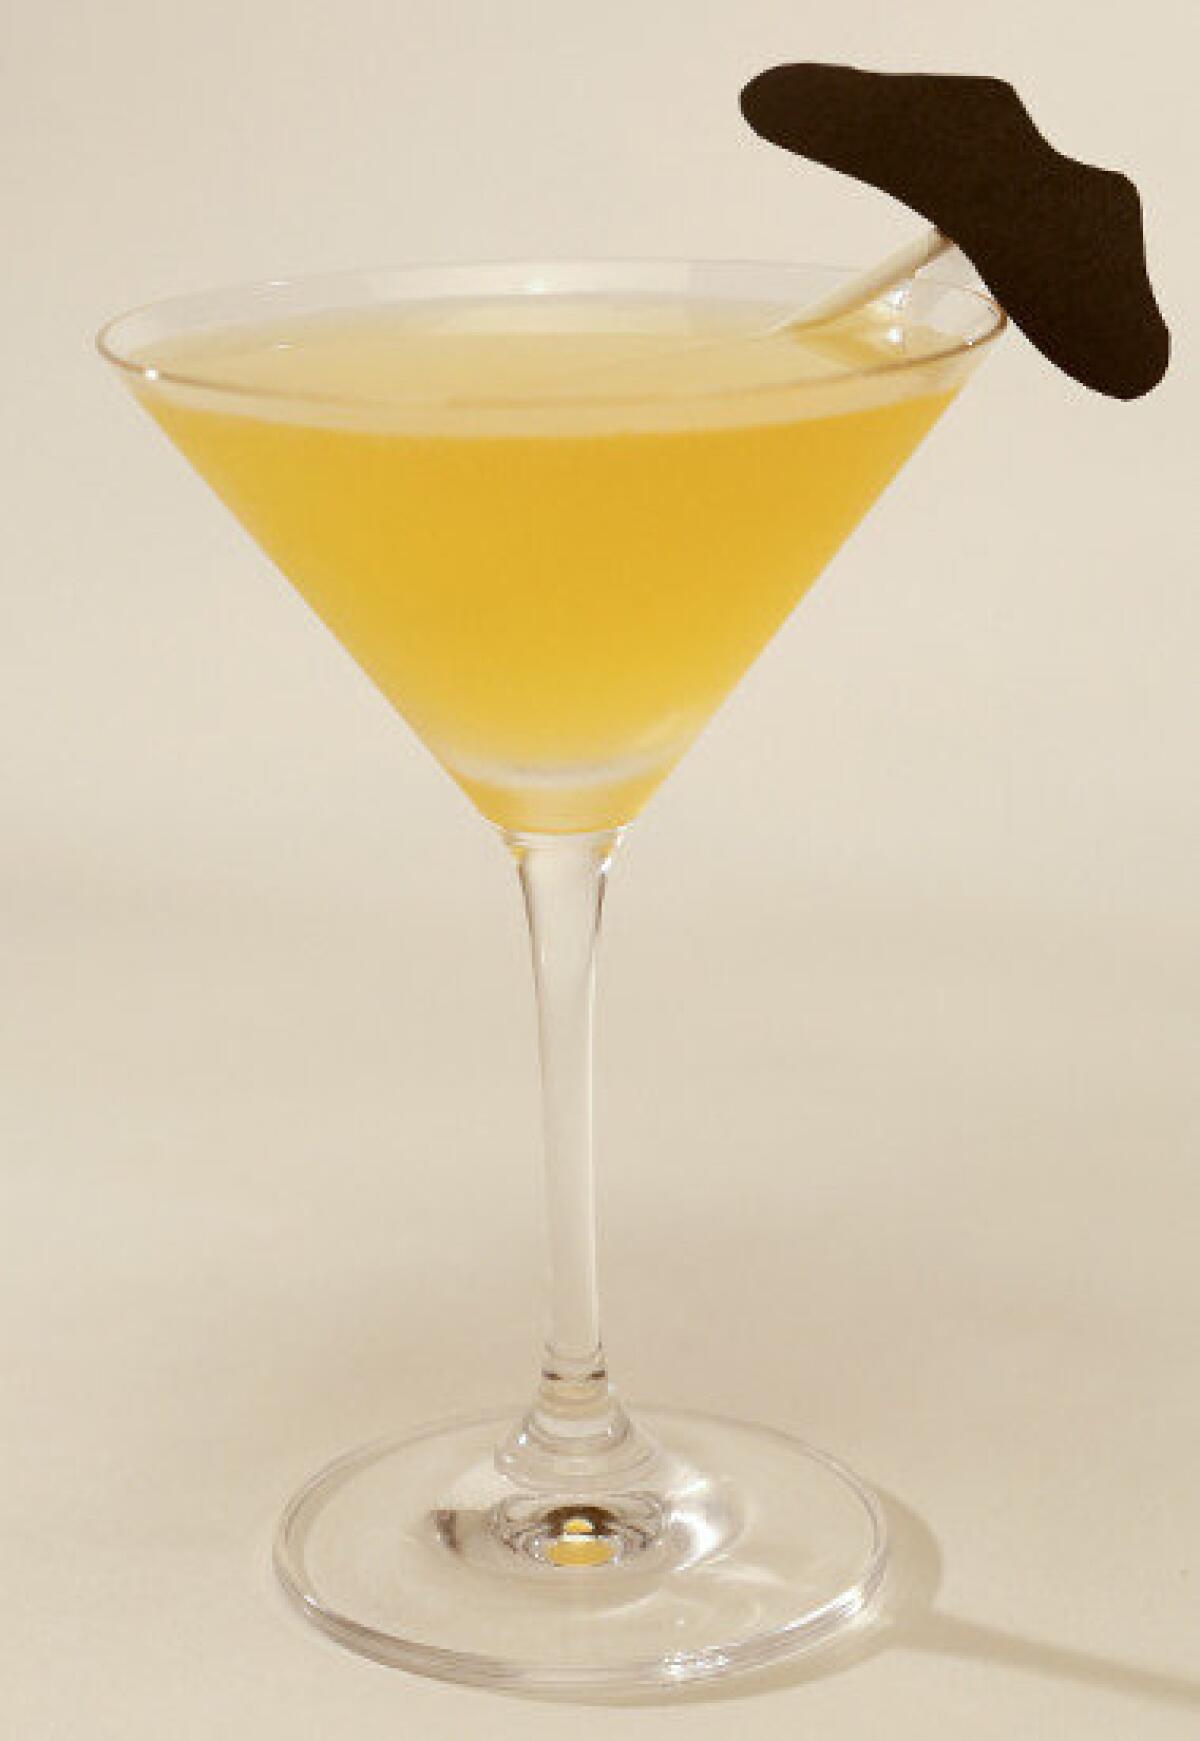 Even with a fake mustache, you can't disguise the fun of the Porn Star cocktail. Recipe: Porn Star Cocktail